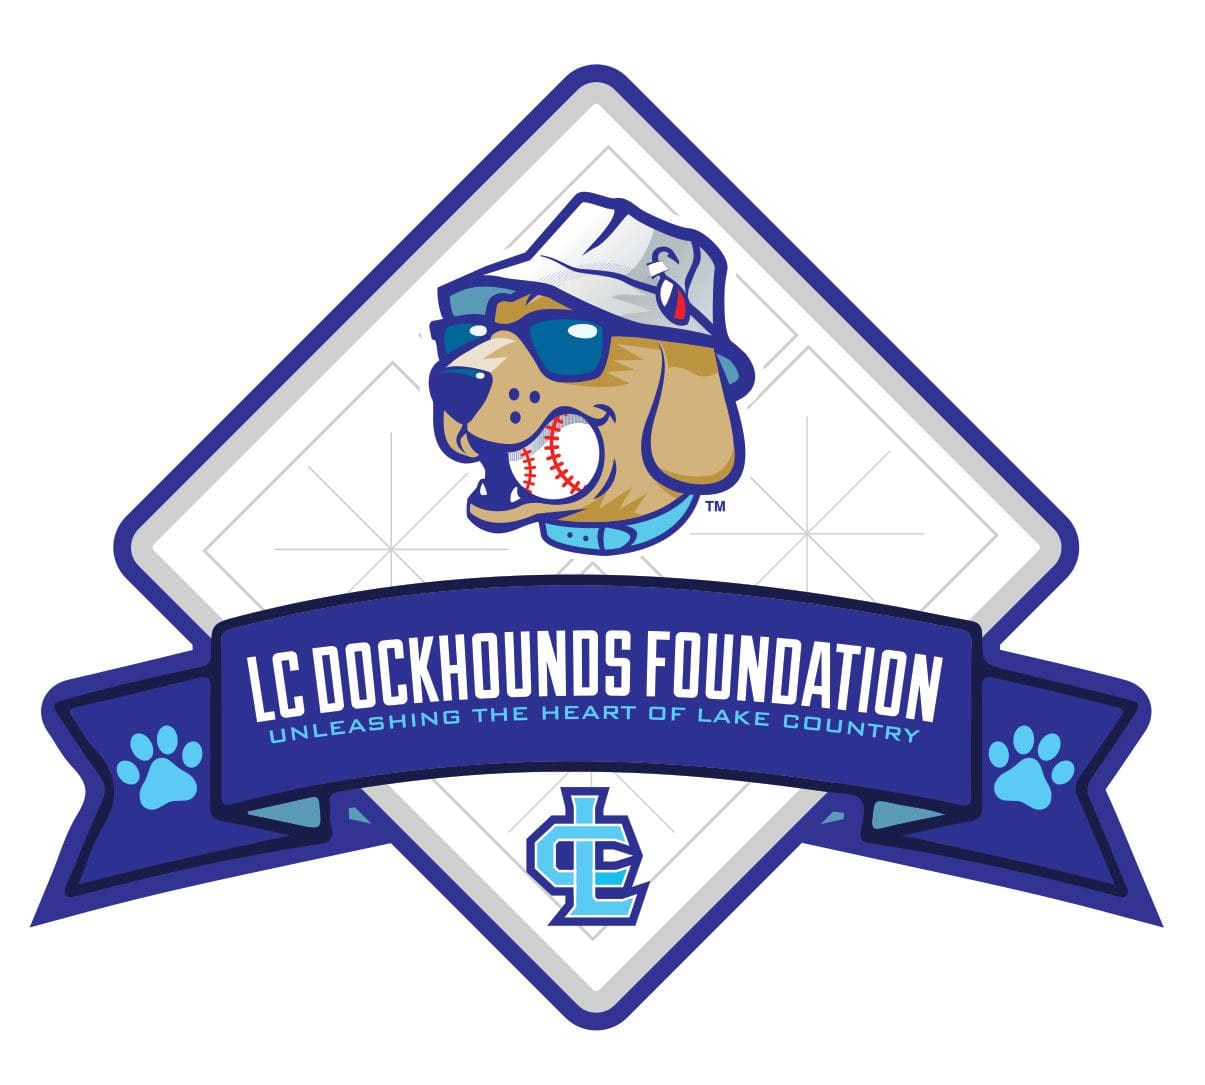 Jersey Auction - Lake Country DockHounds